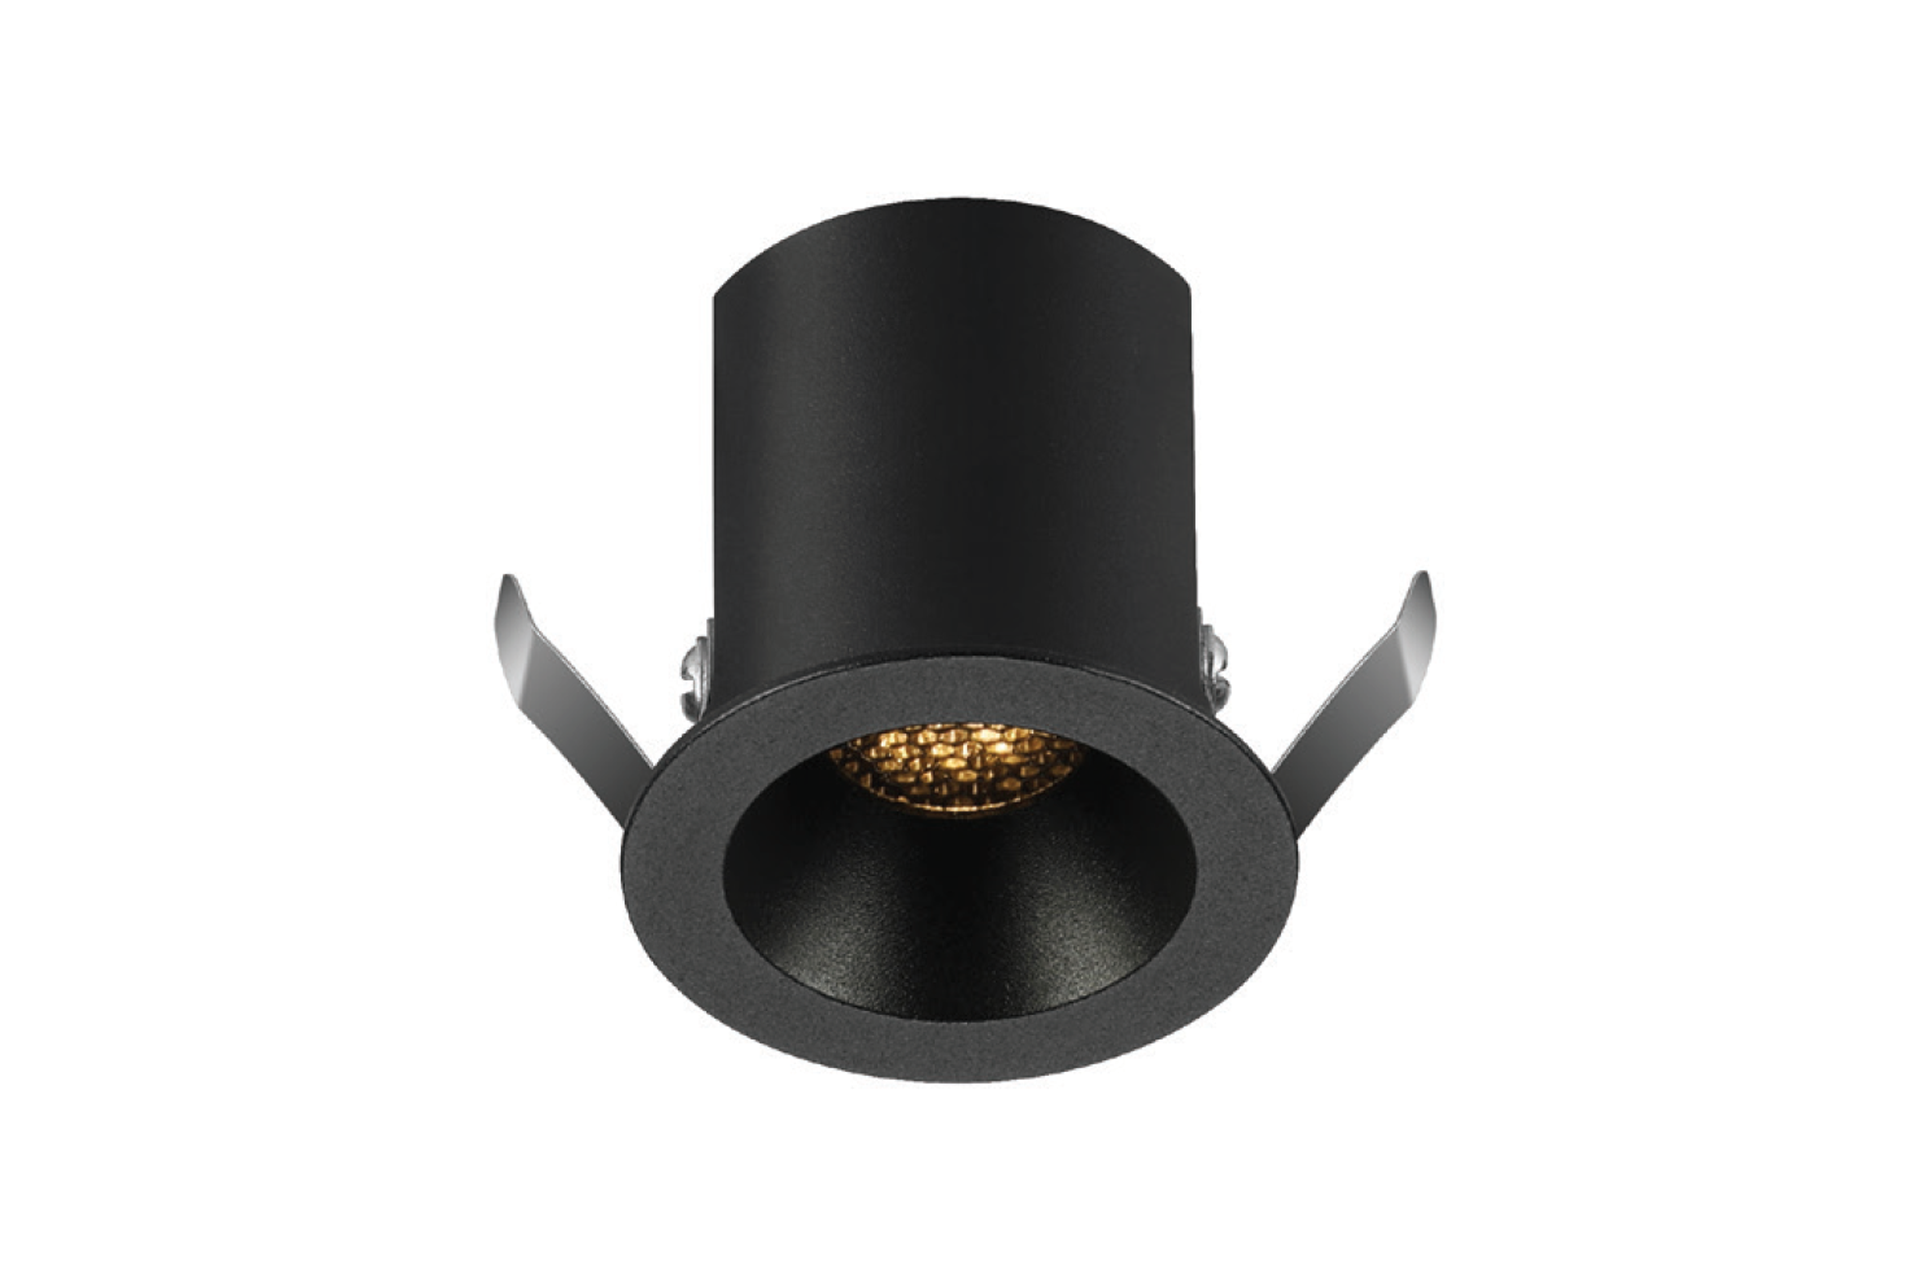 TINY - LED RECESSED DOWNLIGHT